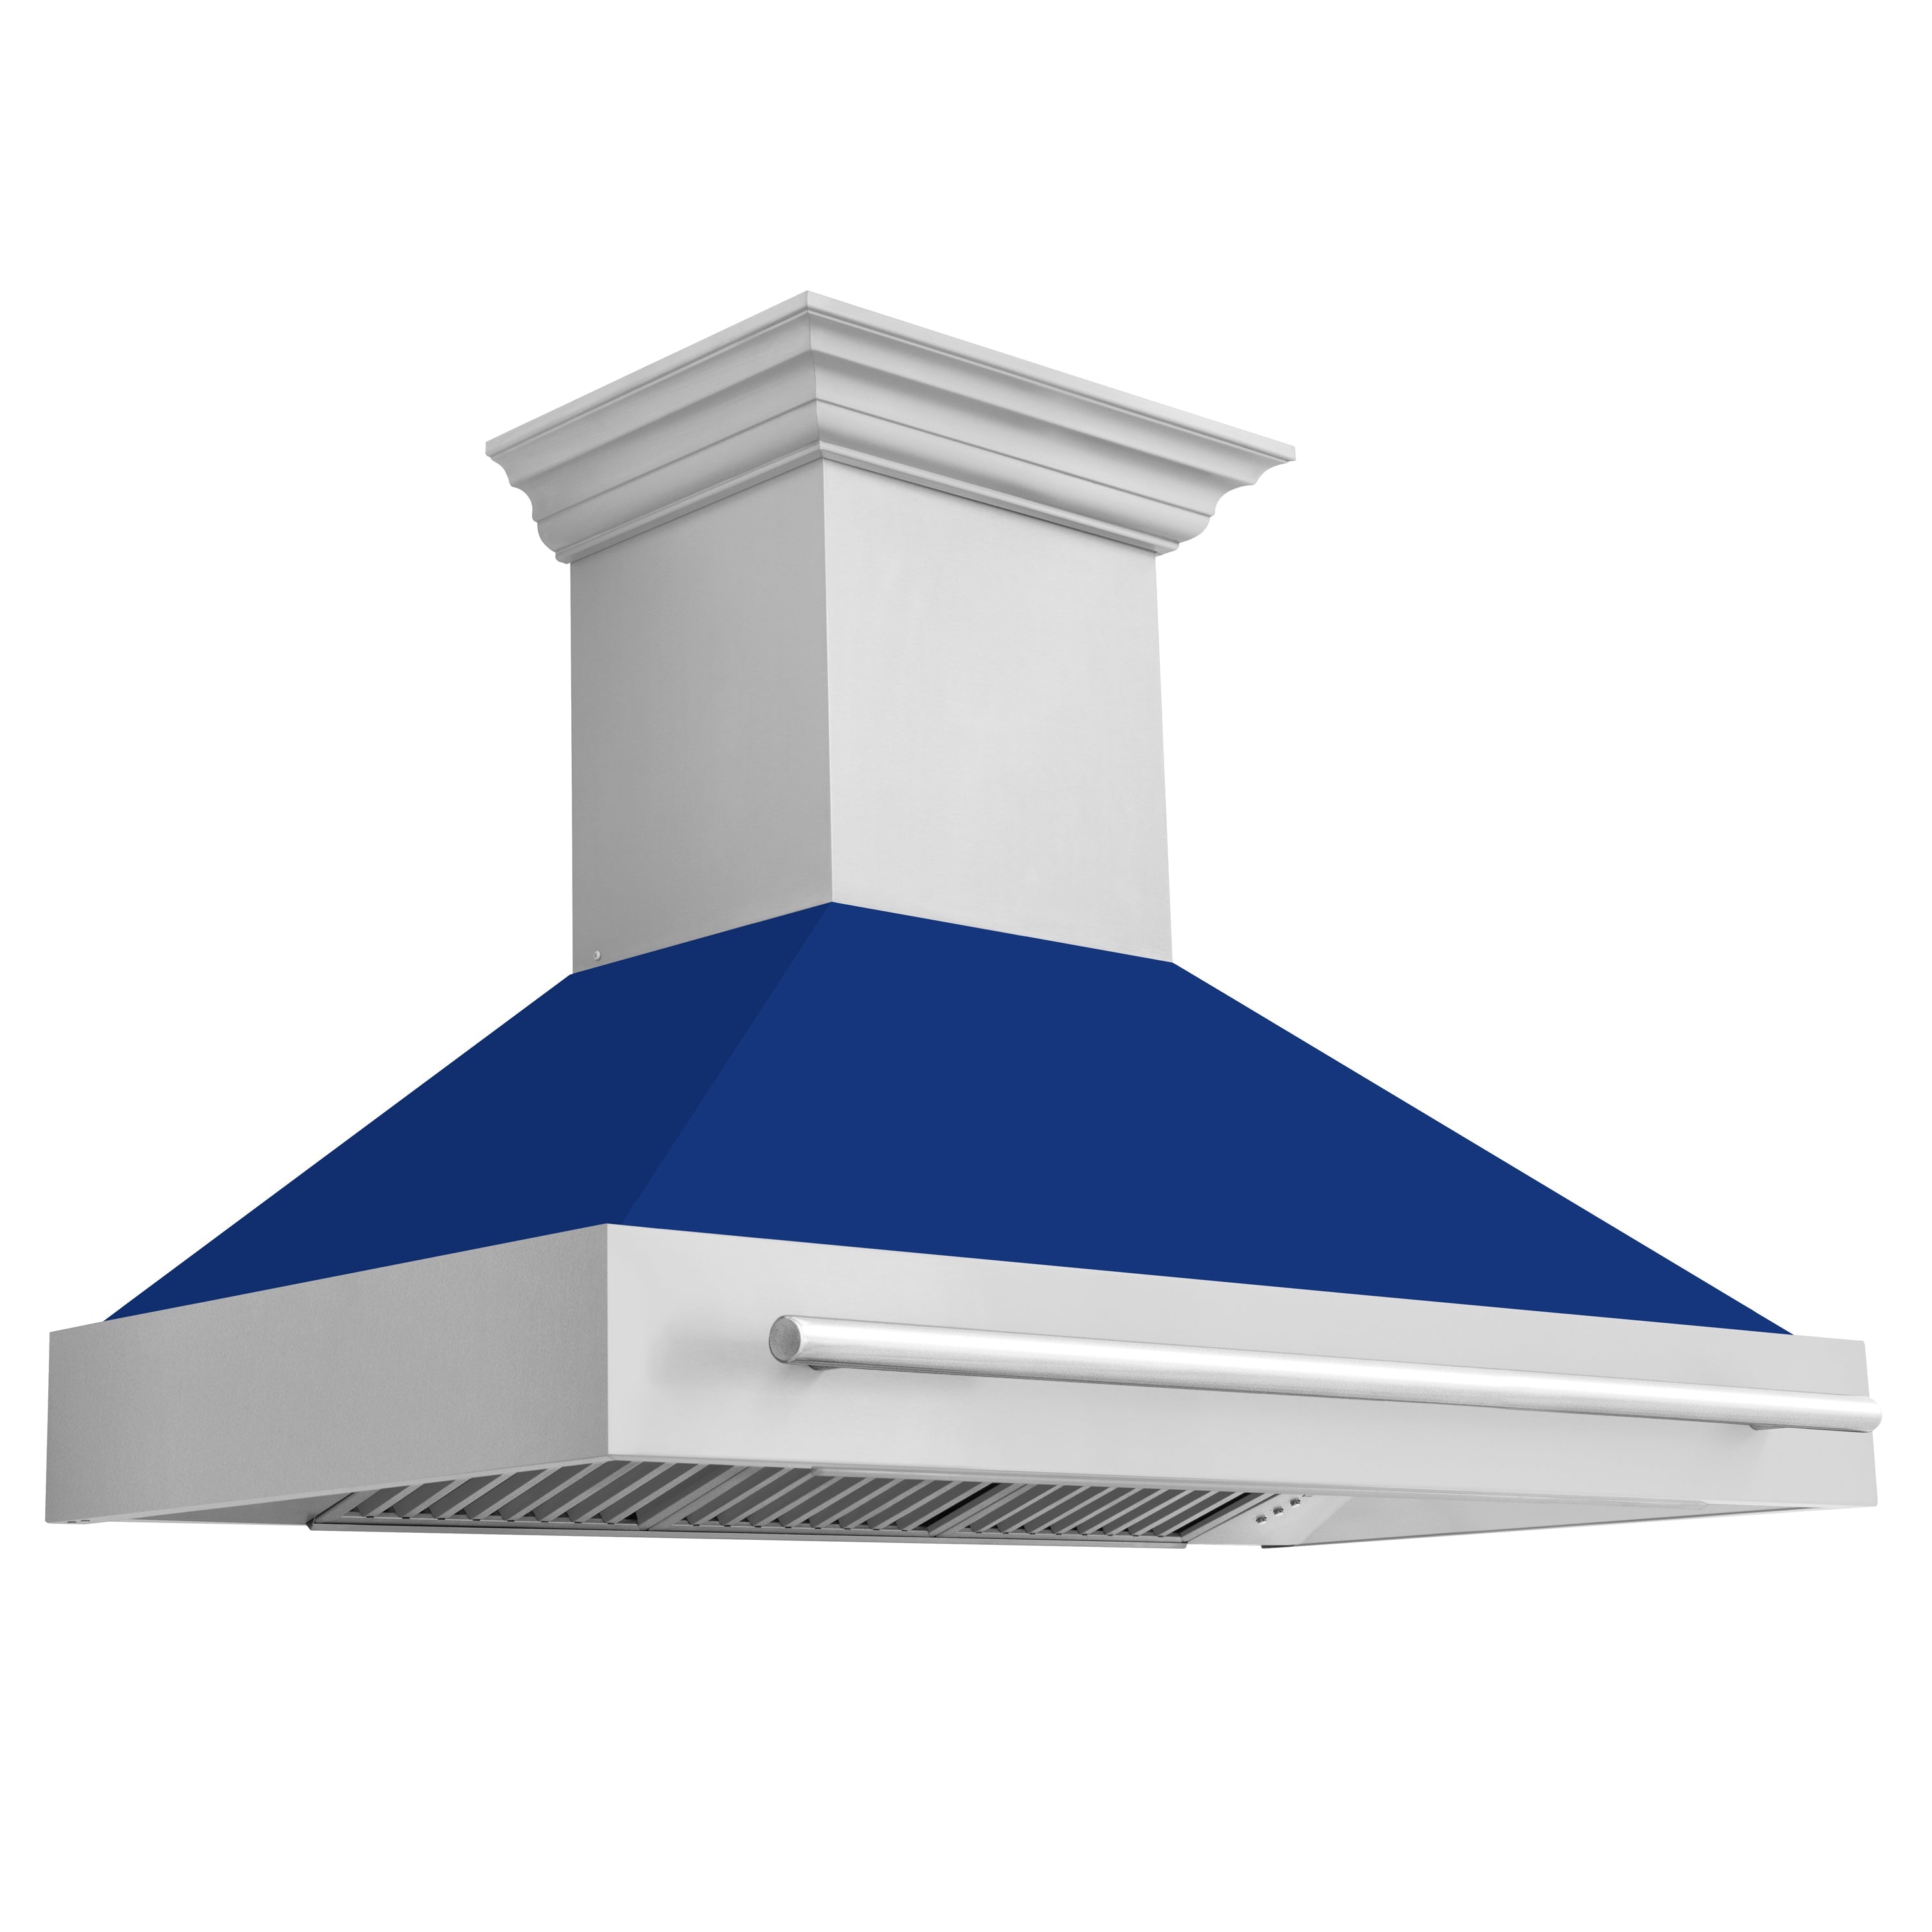 ZLINE 48 in. Stainless Steel Range Hood with Stainless Steel Handle (8654STX-48) with Blue Gloss shell.